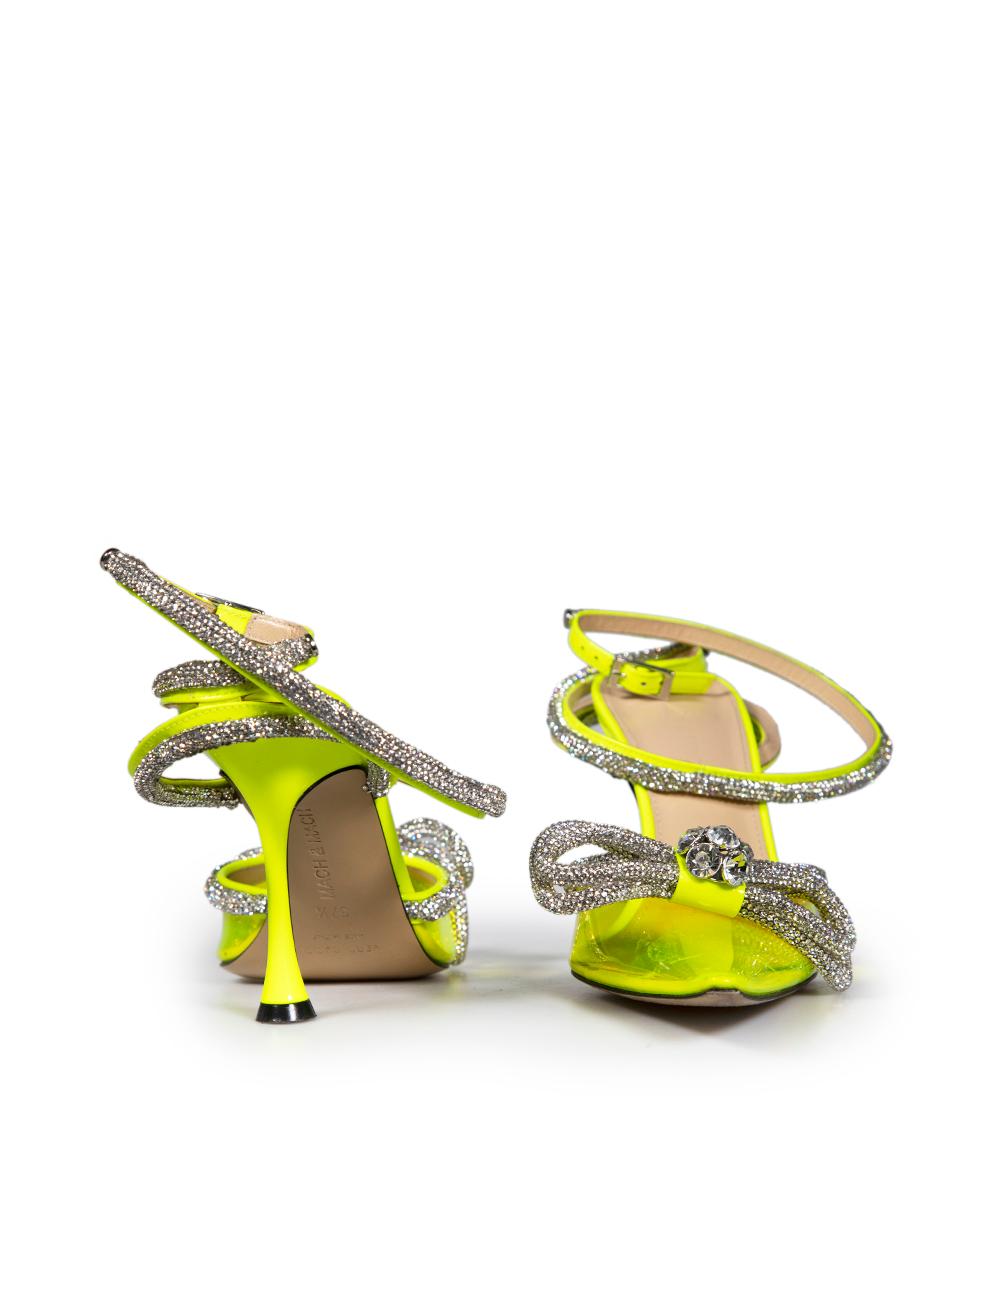 Mach & Mach Neon Yellow PVC Crystal Bow Heels Size IT 37.5 In Good Condition For Sale In London, GB